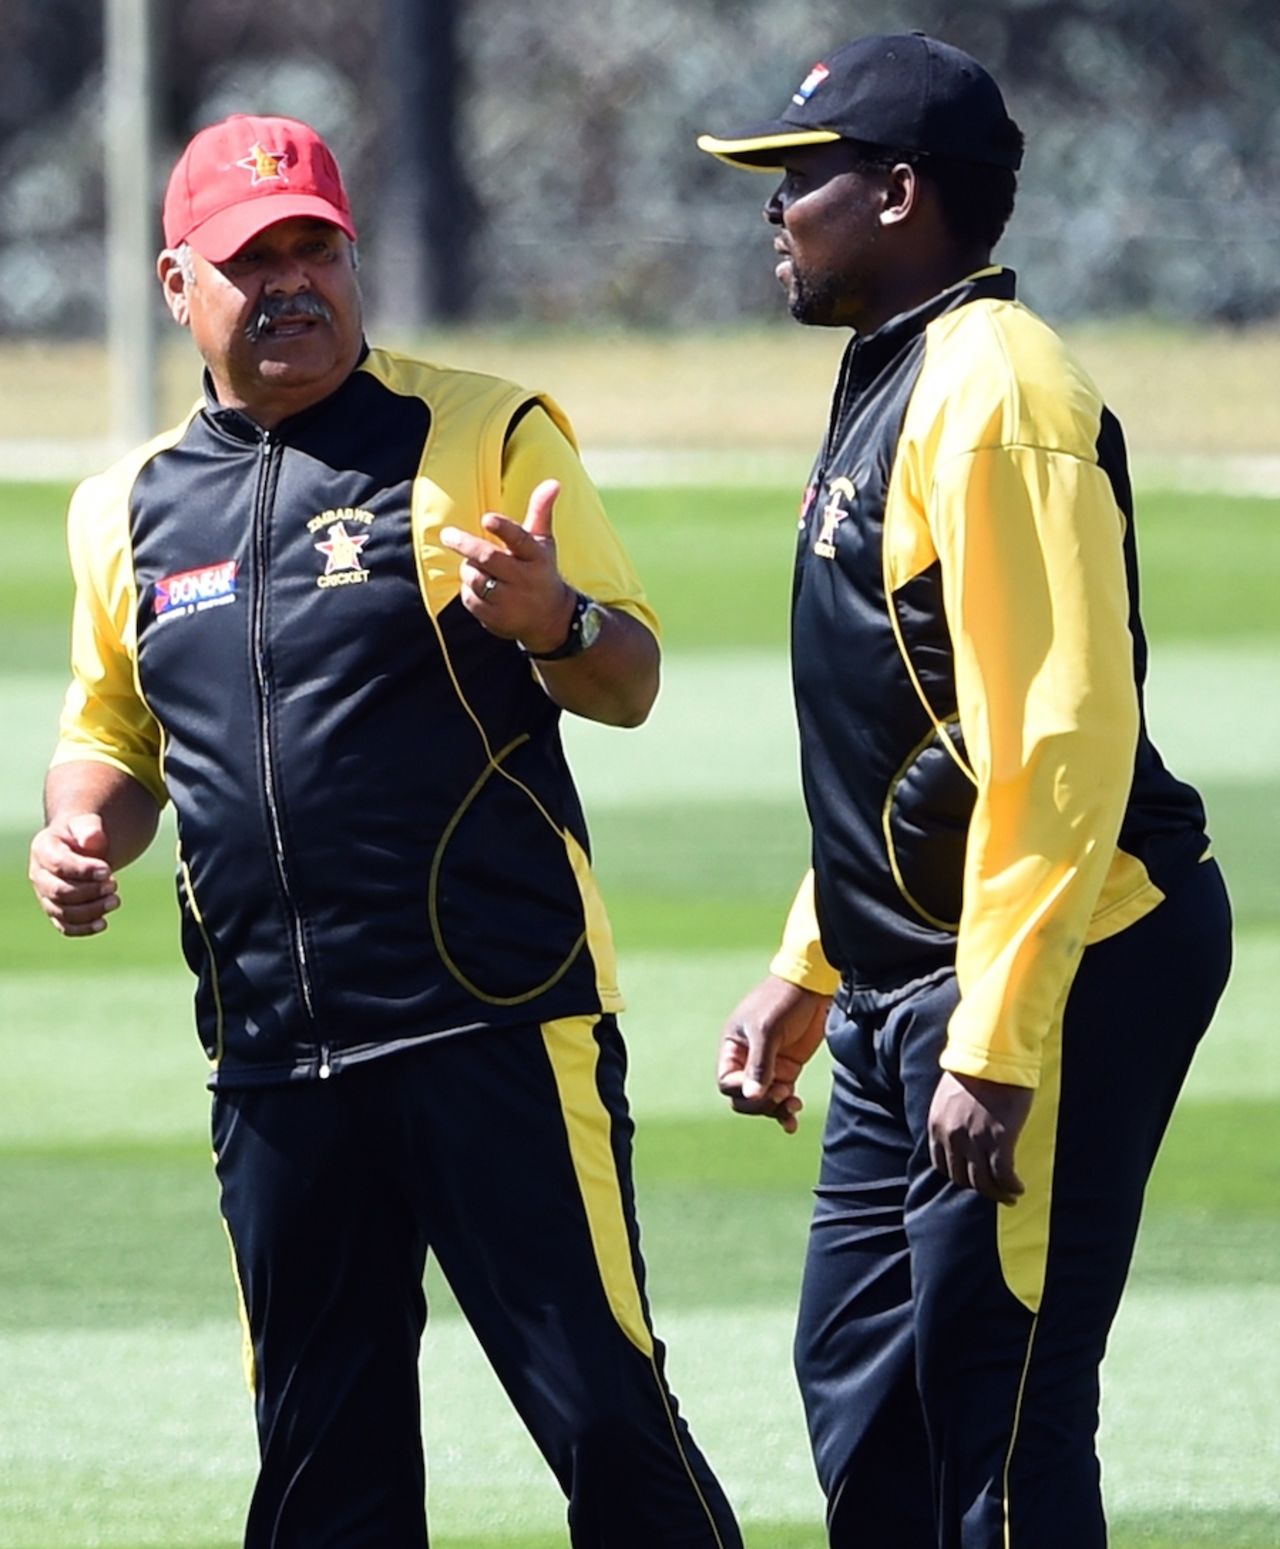 Dav Whatmore has a chat with Hamilton Masakadza, World Cup 2015, Canberra, March 4, 2015